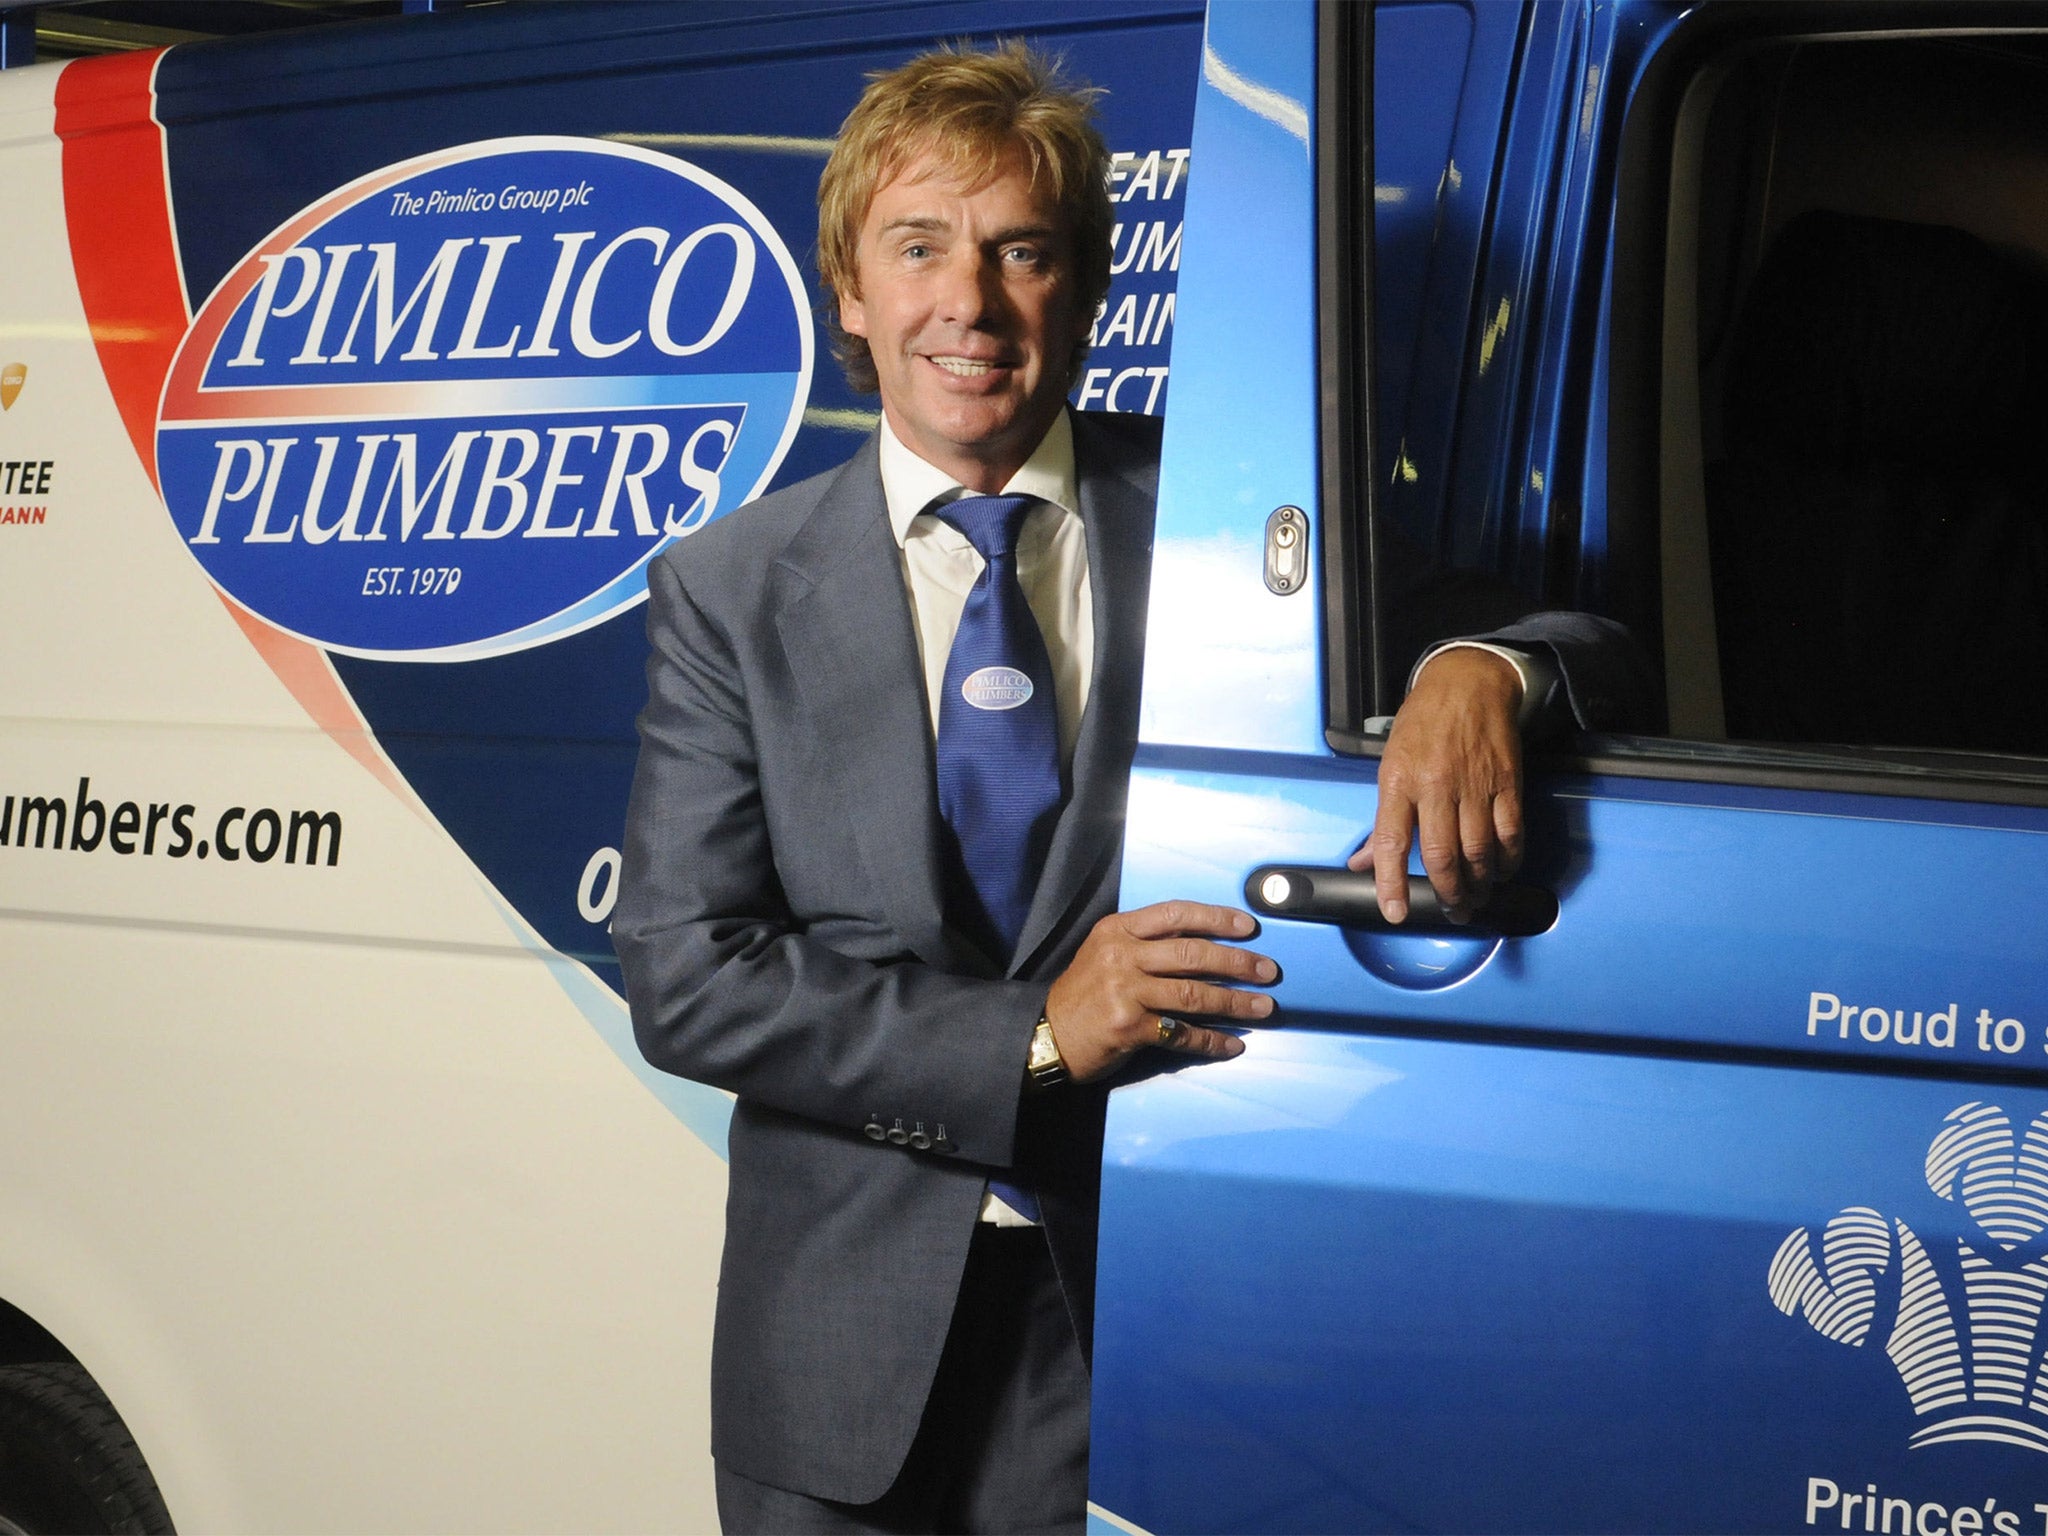 Charlie Mullins, founder of Pimlico Plumbers - OBE